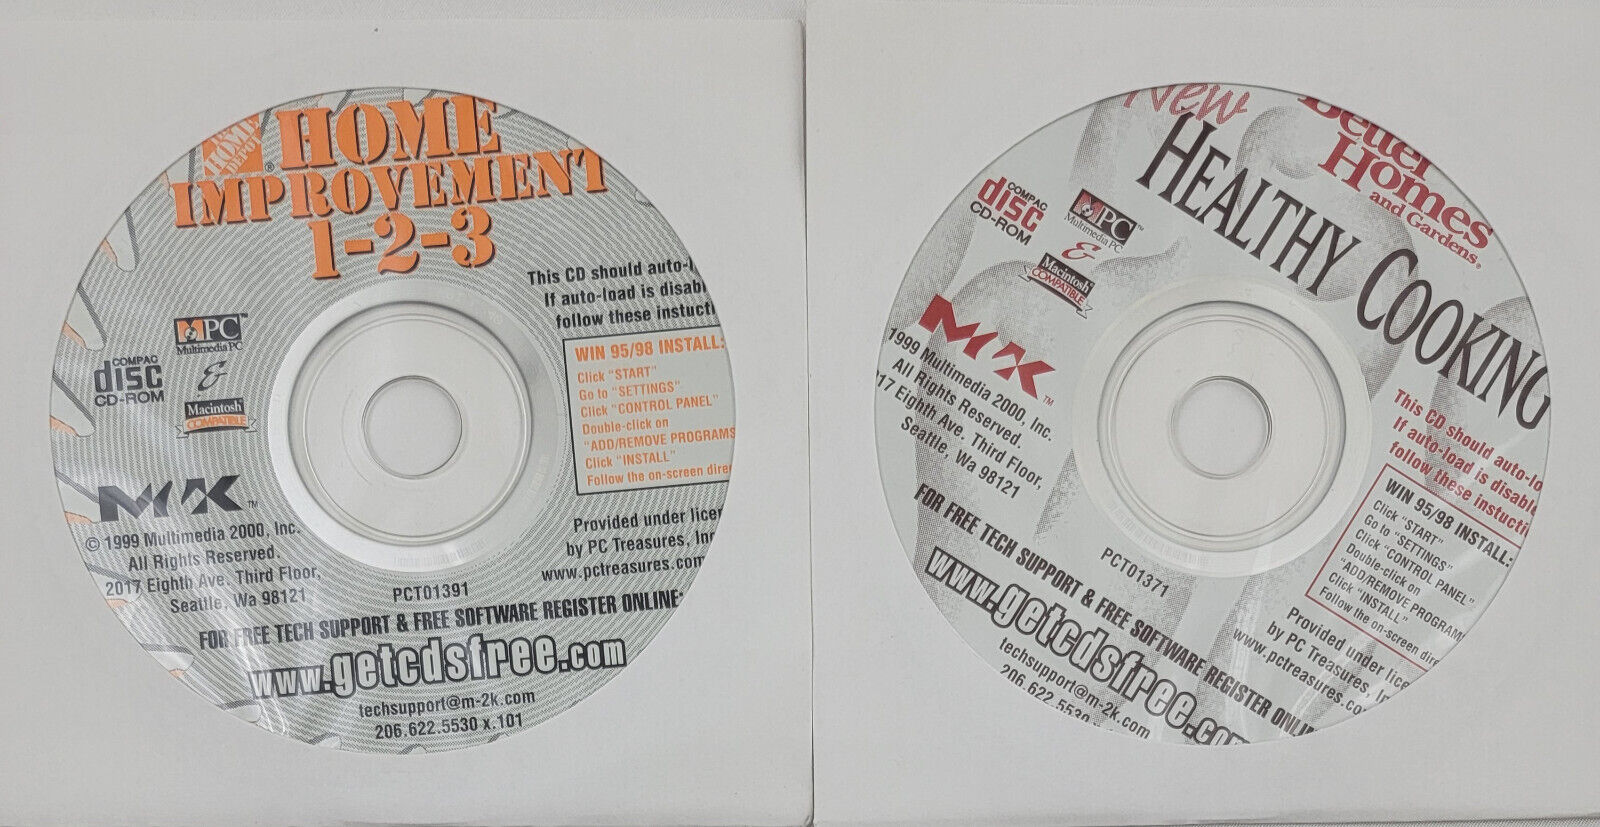 Home Depot Home Improvement 1-2-3 & Better Homes Healthy Cooking PC CD ROMs